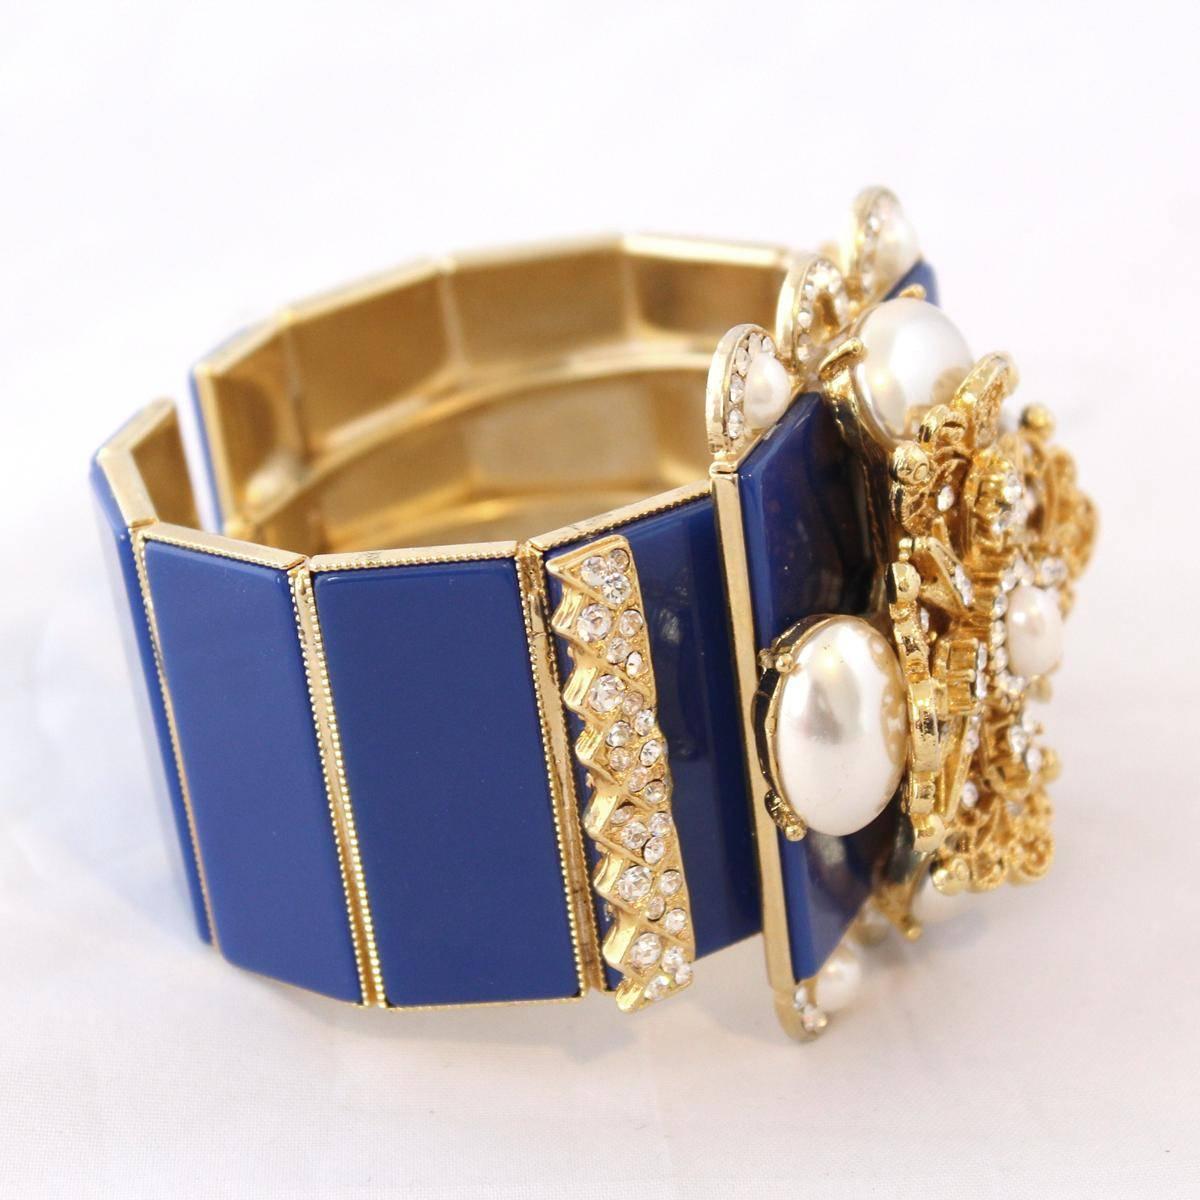 Stunning piece by Carlo Zini Milano
One of the greatest world fashion jewelry designers
Brass and tin combination
Non allergenic 
18 KT gold dipped (3 micron)
Amazing hand creation of swarovski crystals and beads
Total width cm 7 (2.75 inches)
Wrist